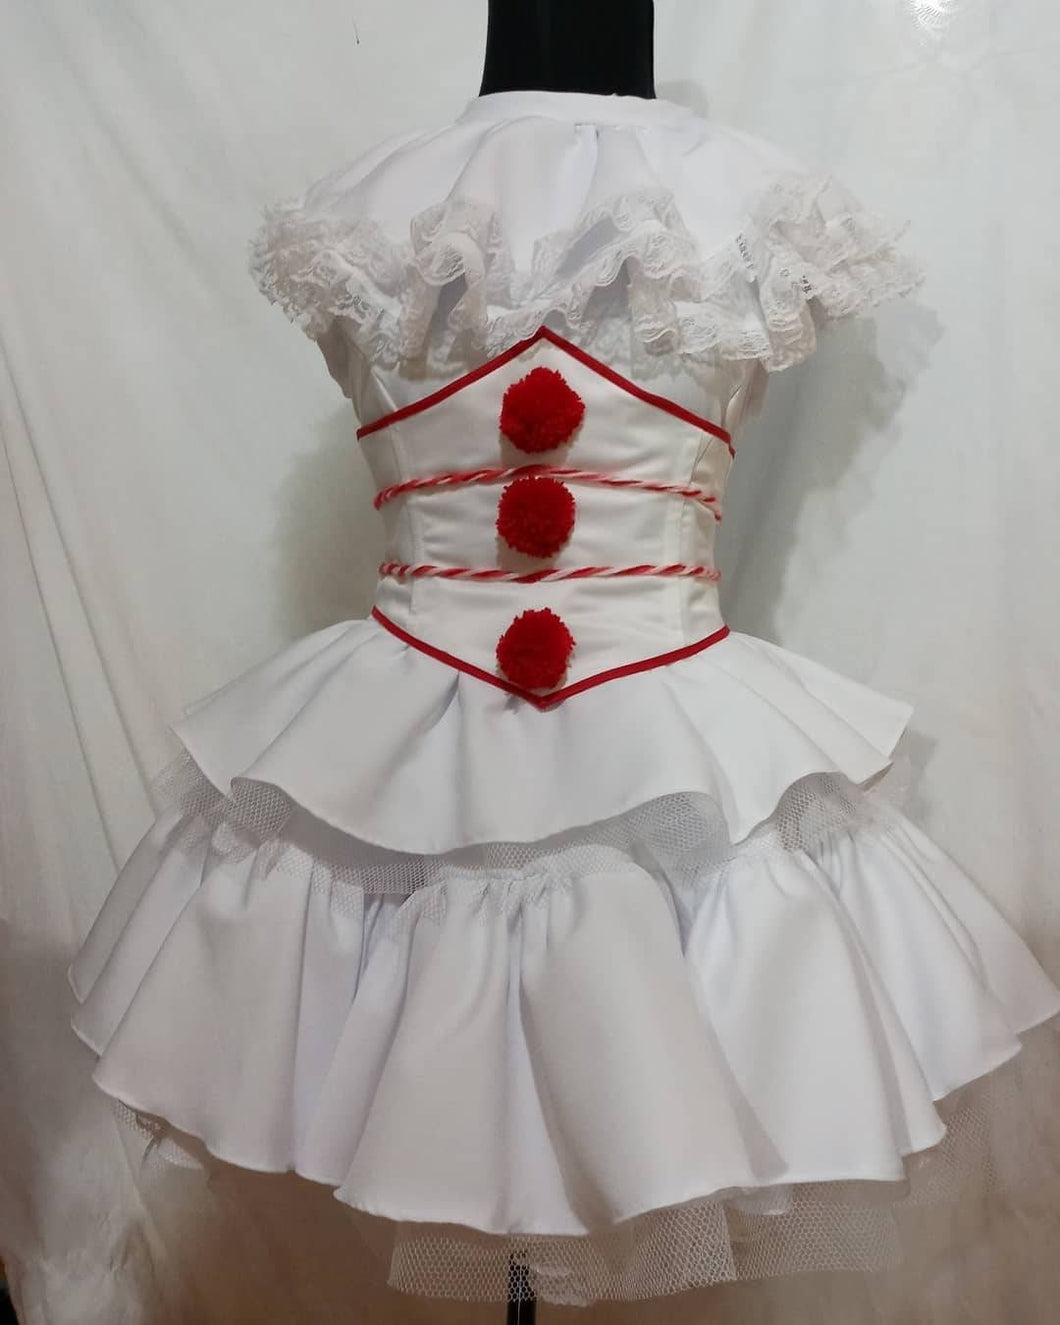 Pennywise Cosplay costume